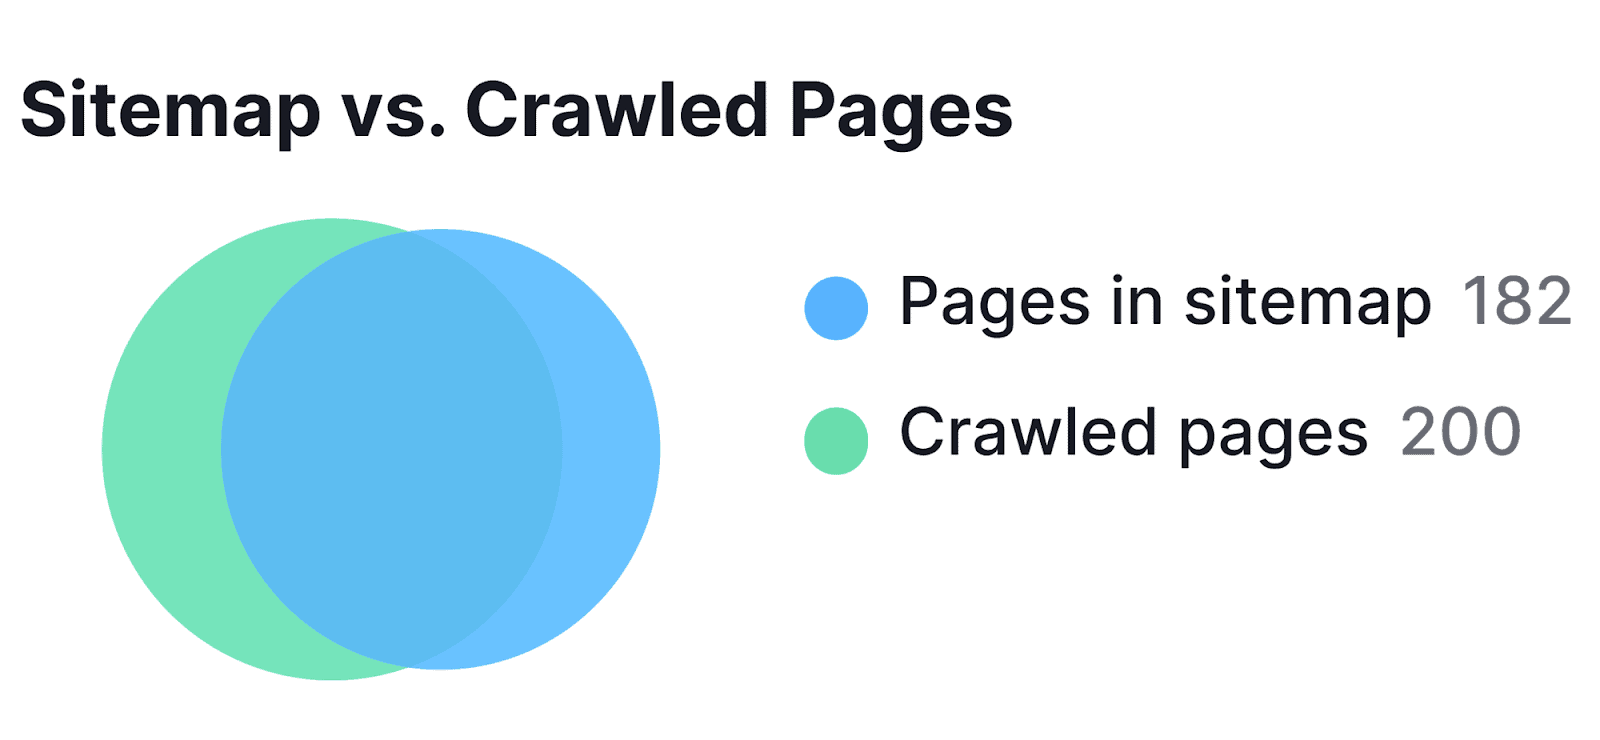 Sitemap vs. Crawled Pages report